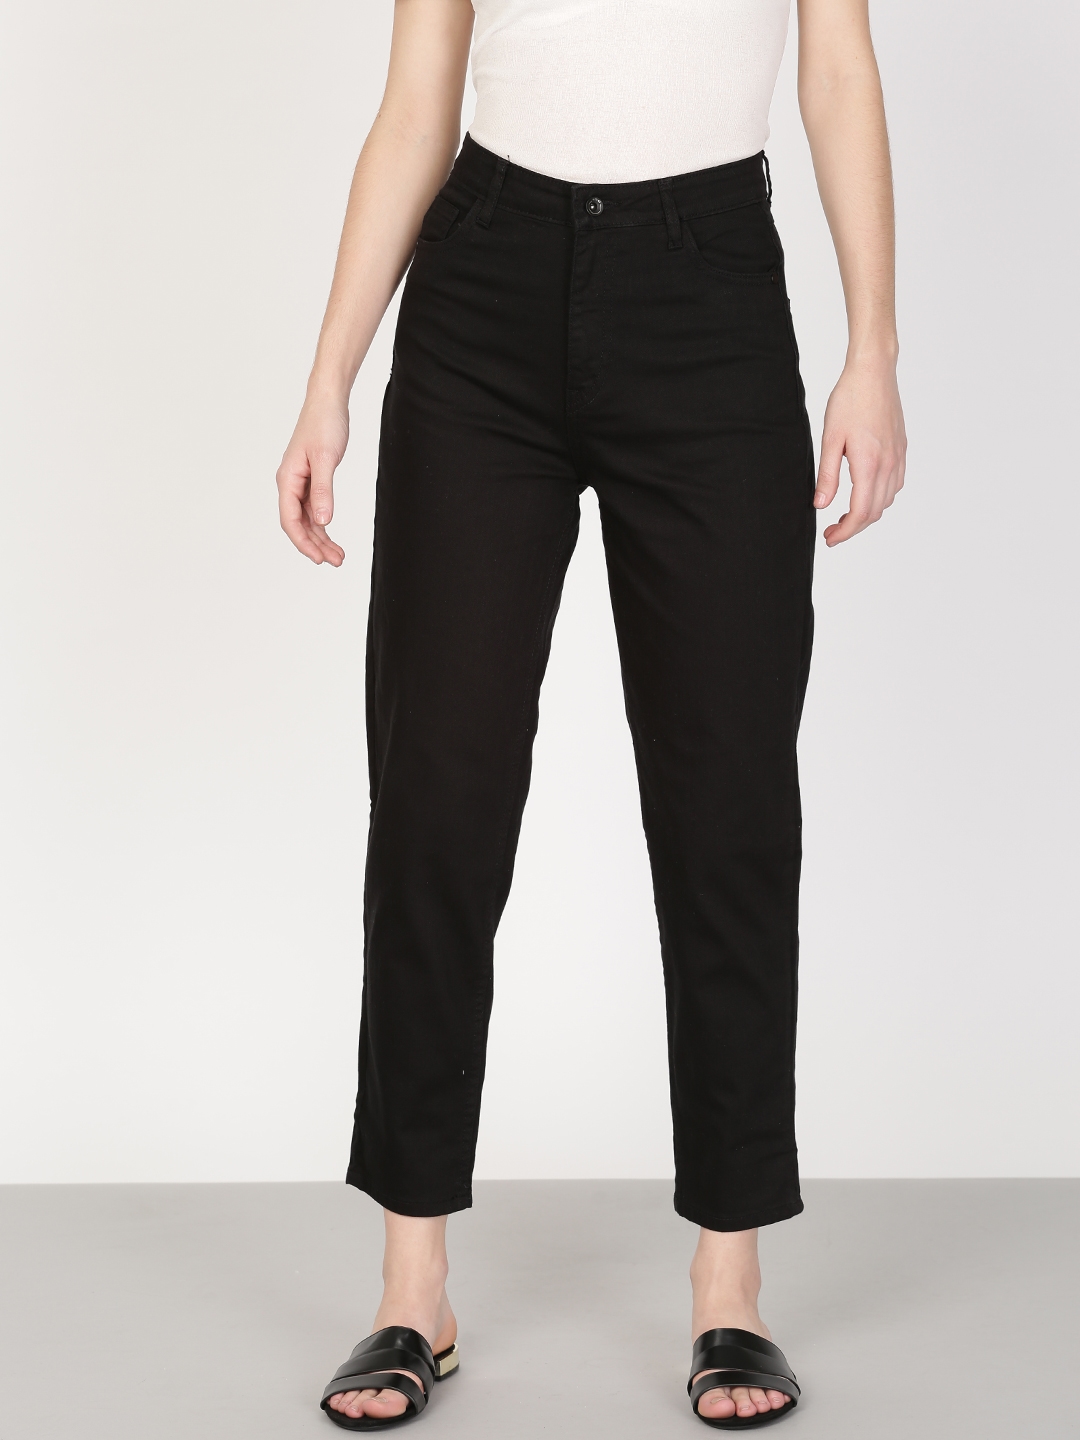 Gioya Mom fit women's jeans: for sale at 31.99€ on Mecshopping.it-calidas.vn